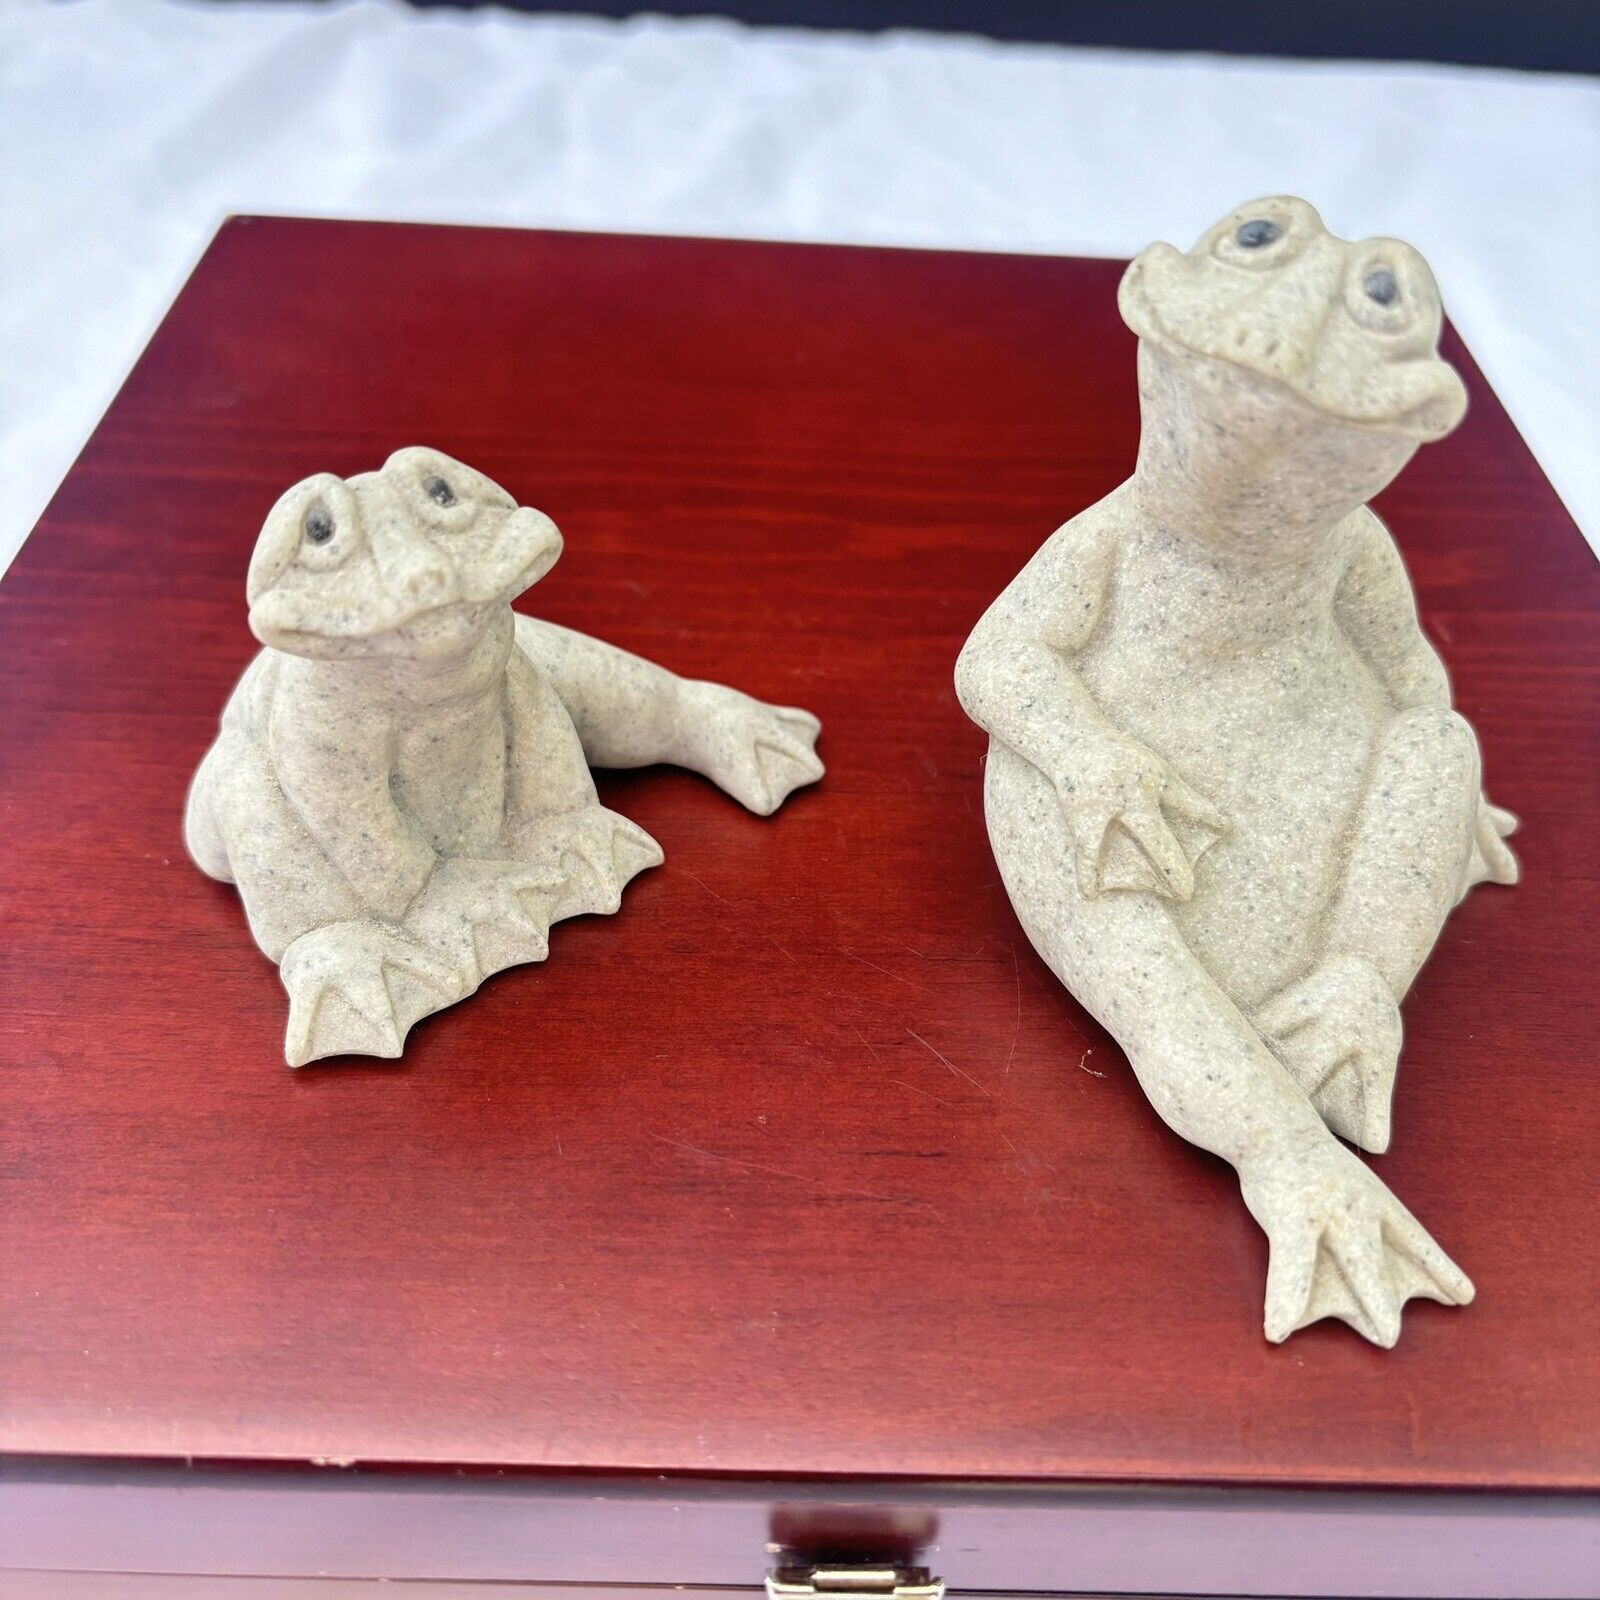 Frog Figurines Quarry Critters Freddie And Frita Second Nature Design